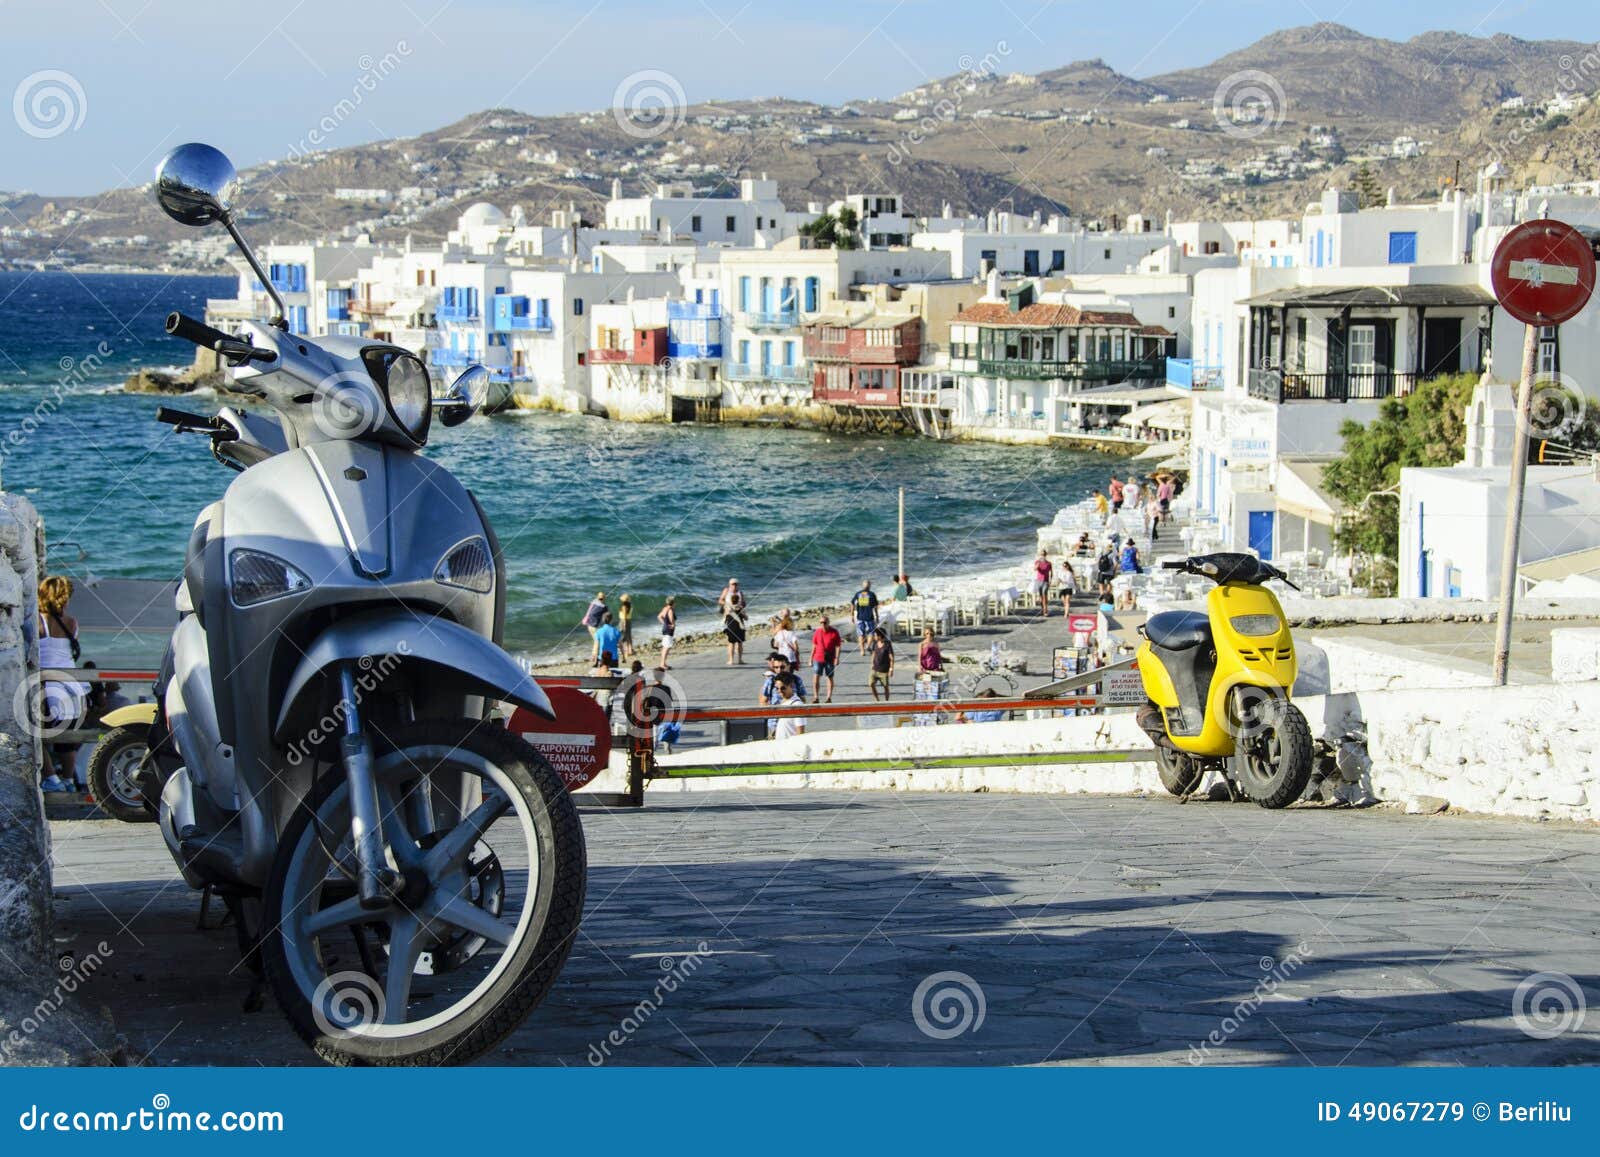 Scooters stock image. Image of sunny -